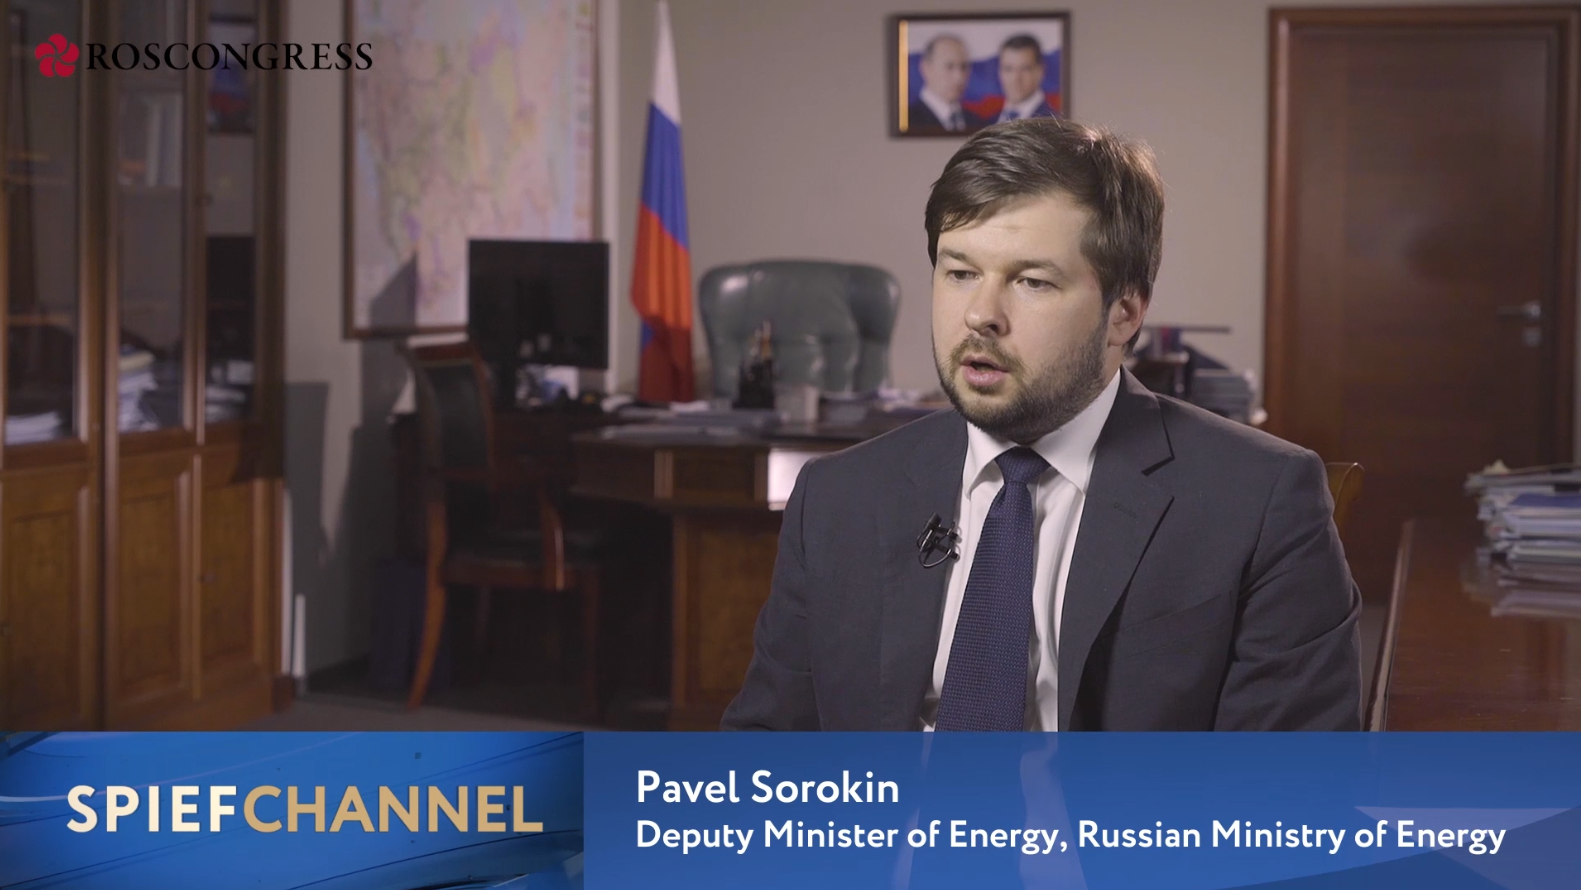 Pavel Sorokin, Deputy Minister of Energy of the Russian Federation